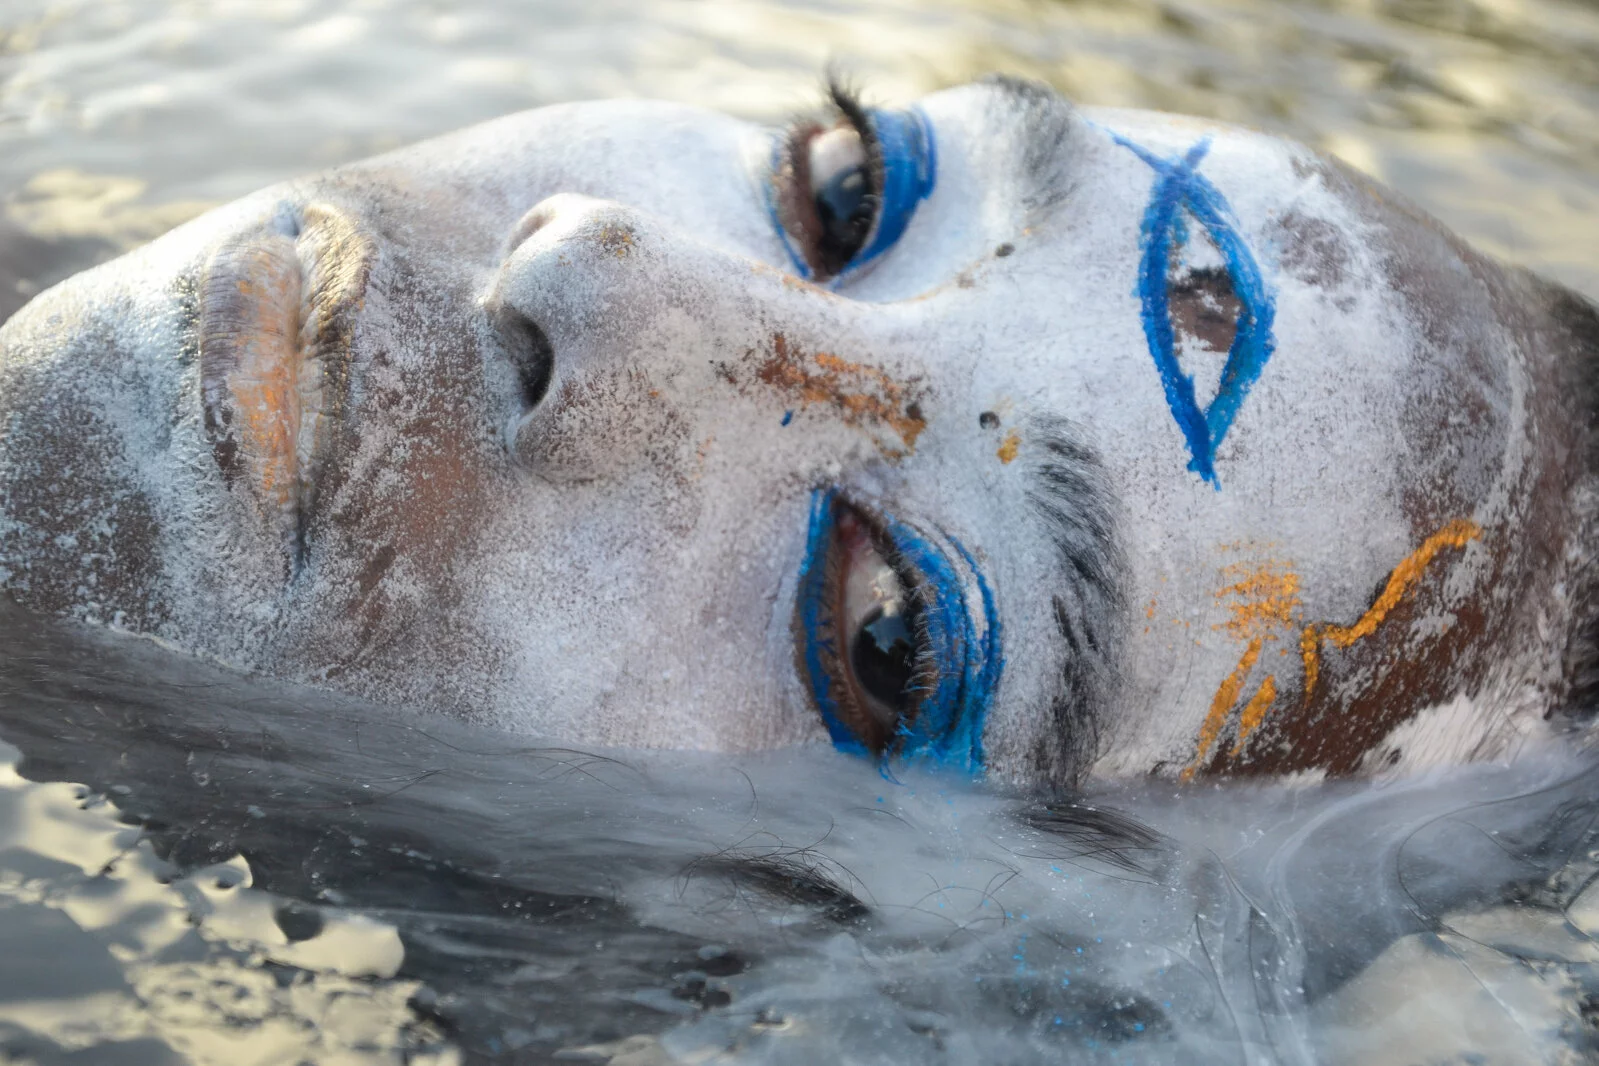 Close up of a person's head in a reclined position turned slightly towards the camera. Their face is painted white with blue eyeshadow and a painted third eye.